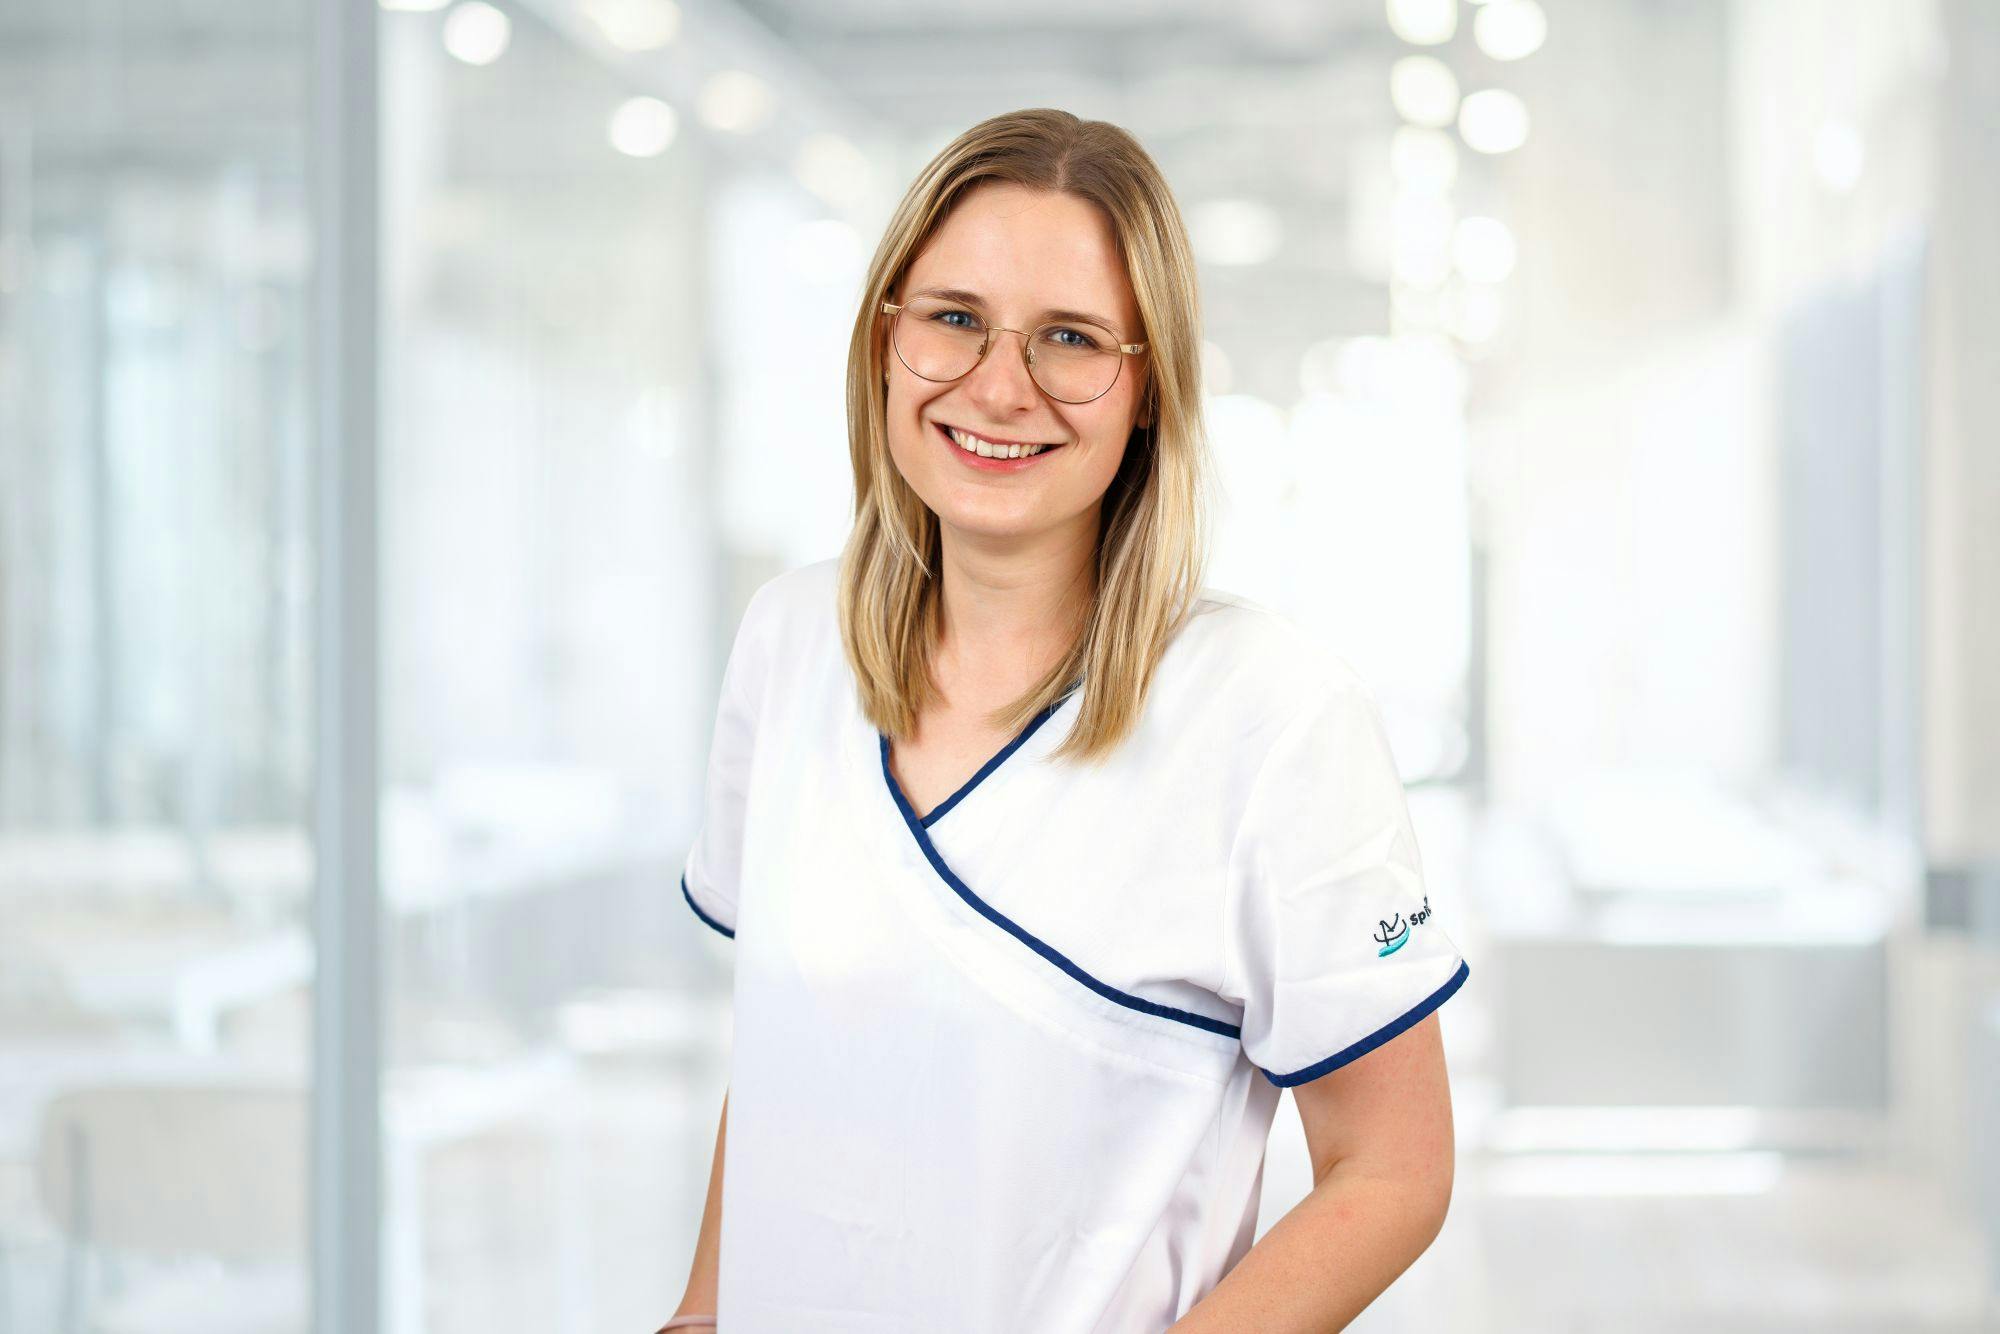 Young smiling nurse in professional dress with glasses in front of blurred hospital background.